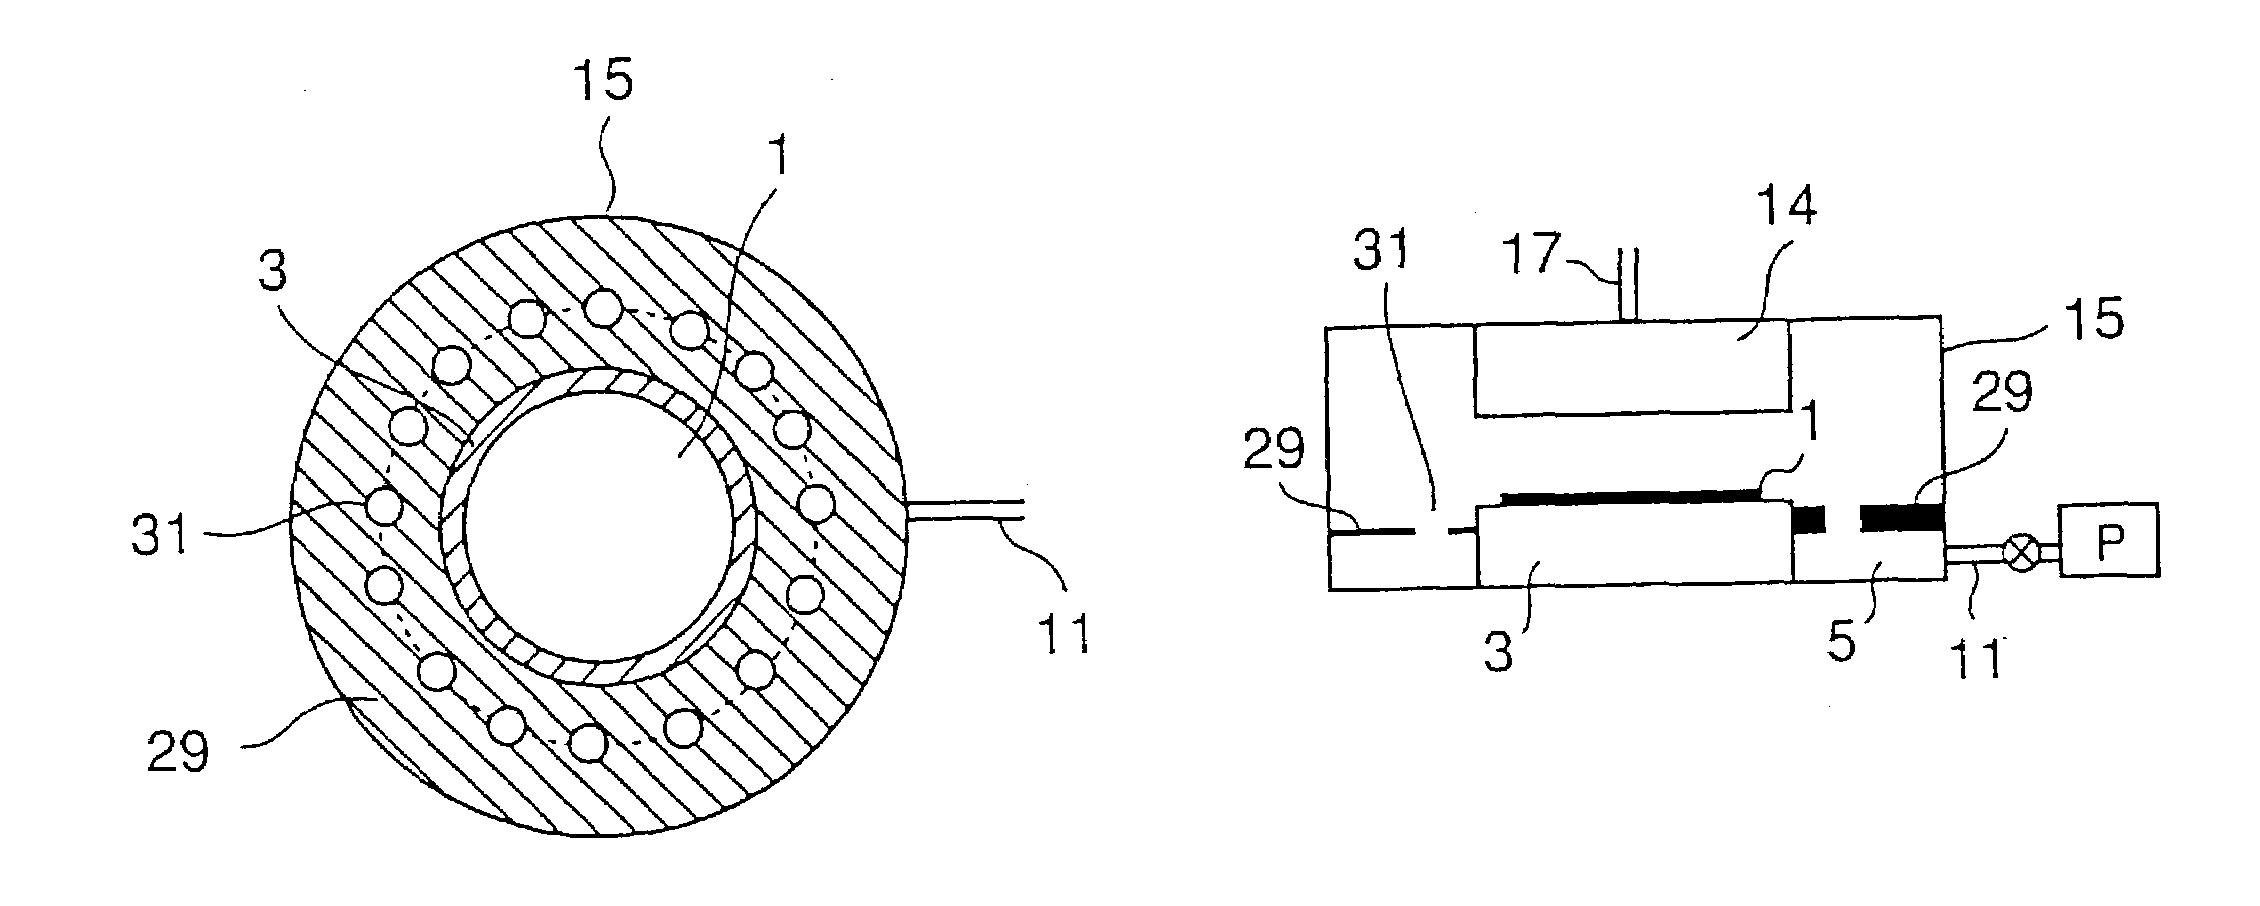 Baffle plate, apparatus for producing the same, method of producing the same, and gas processing apparatus containing baffle plate